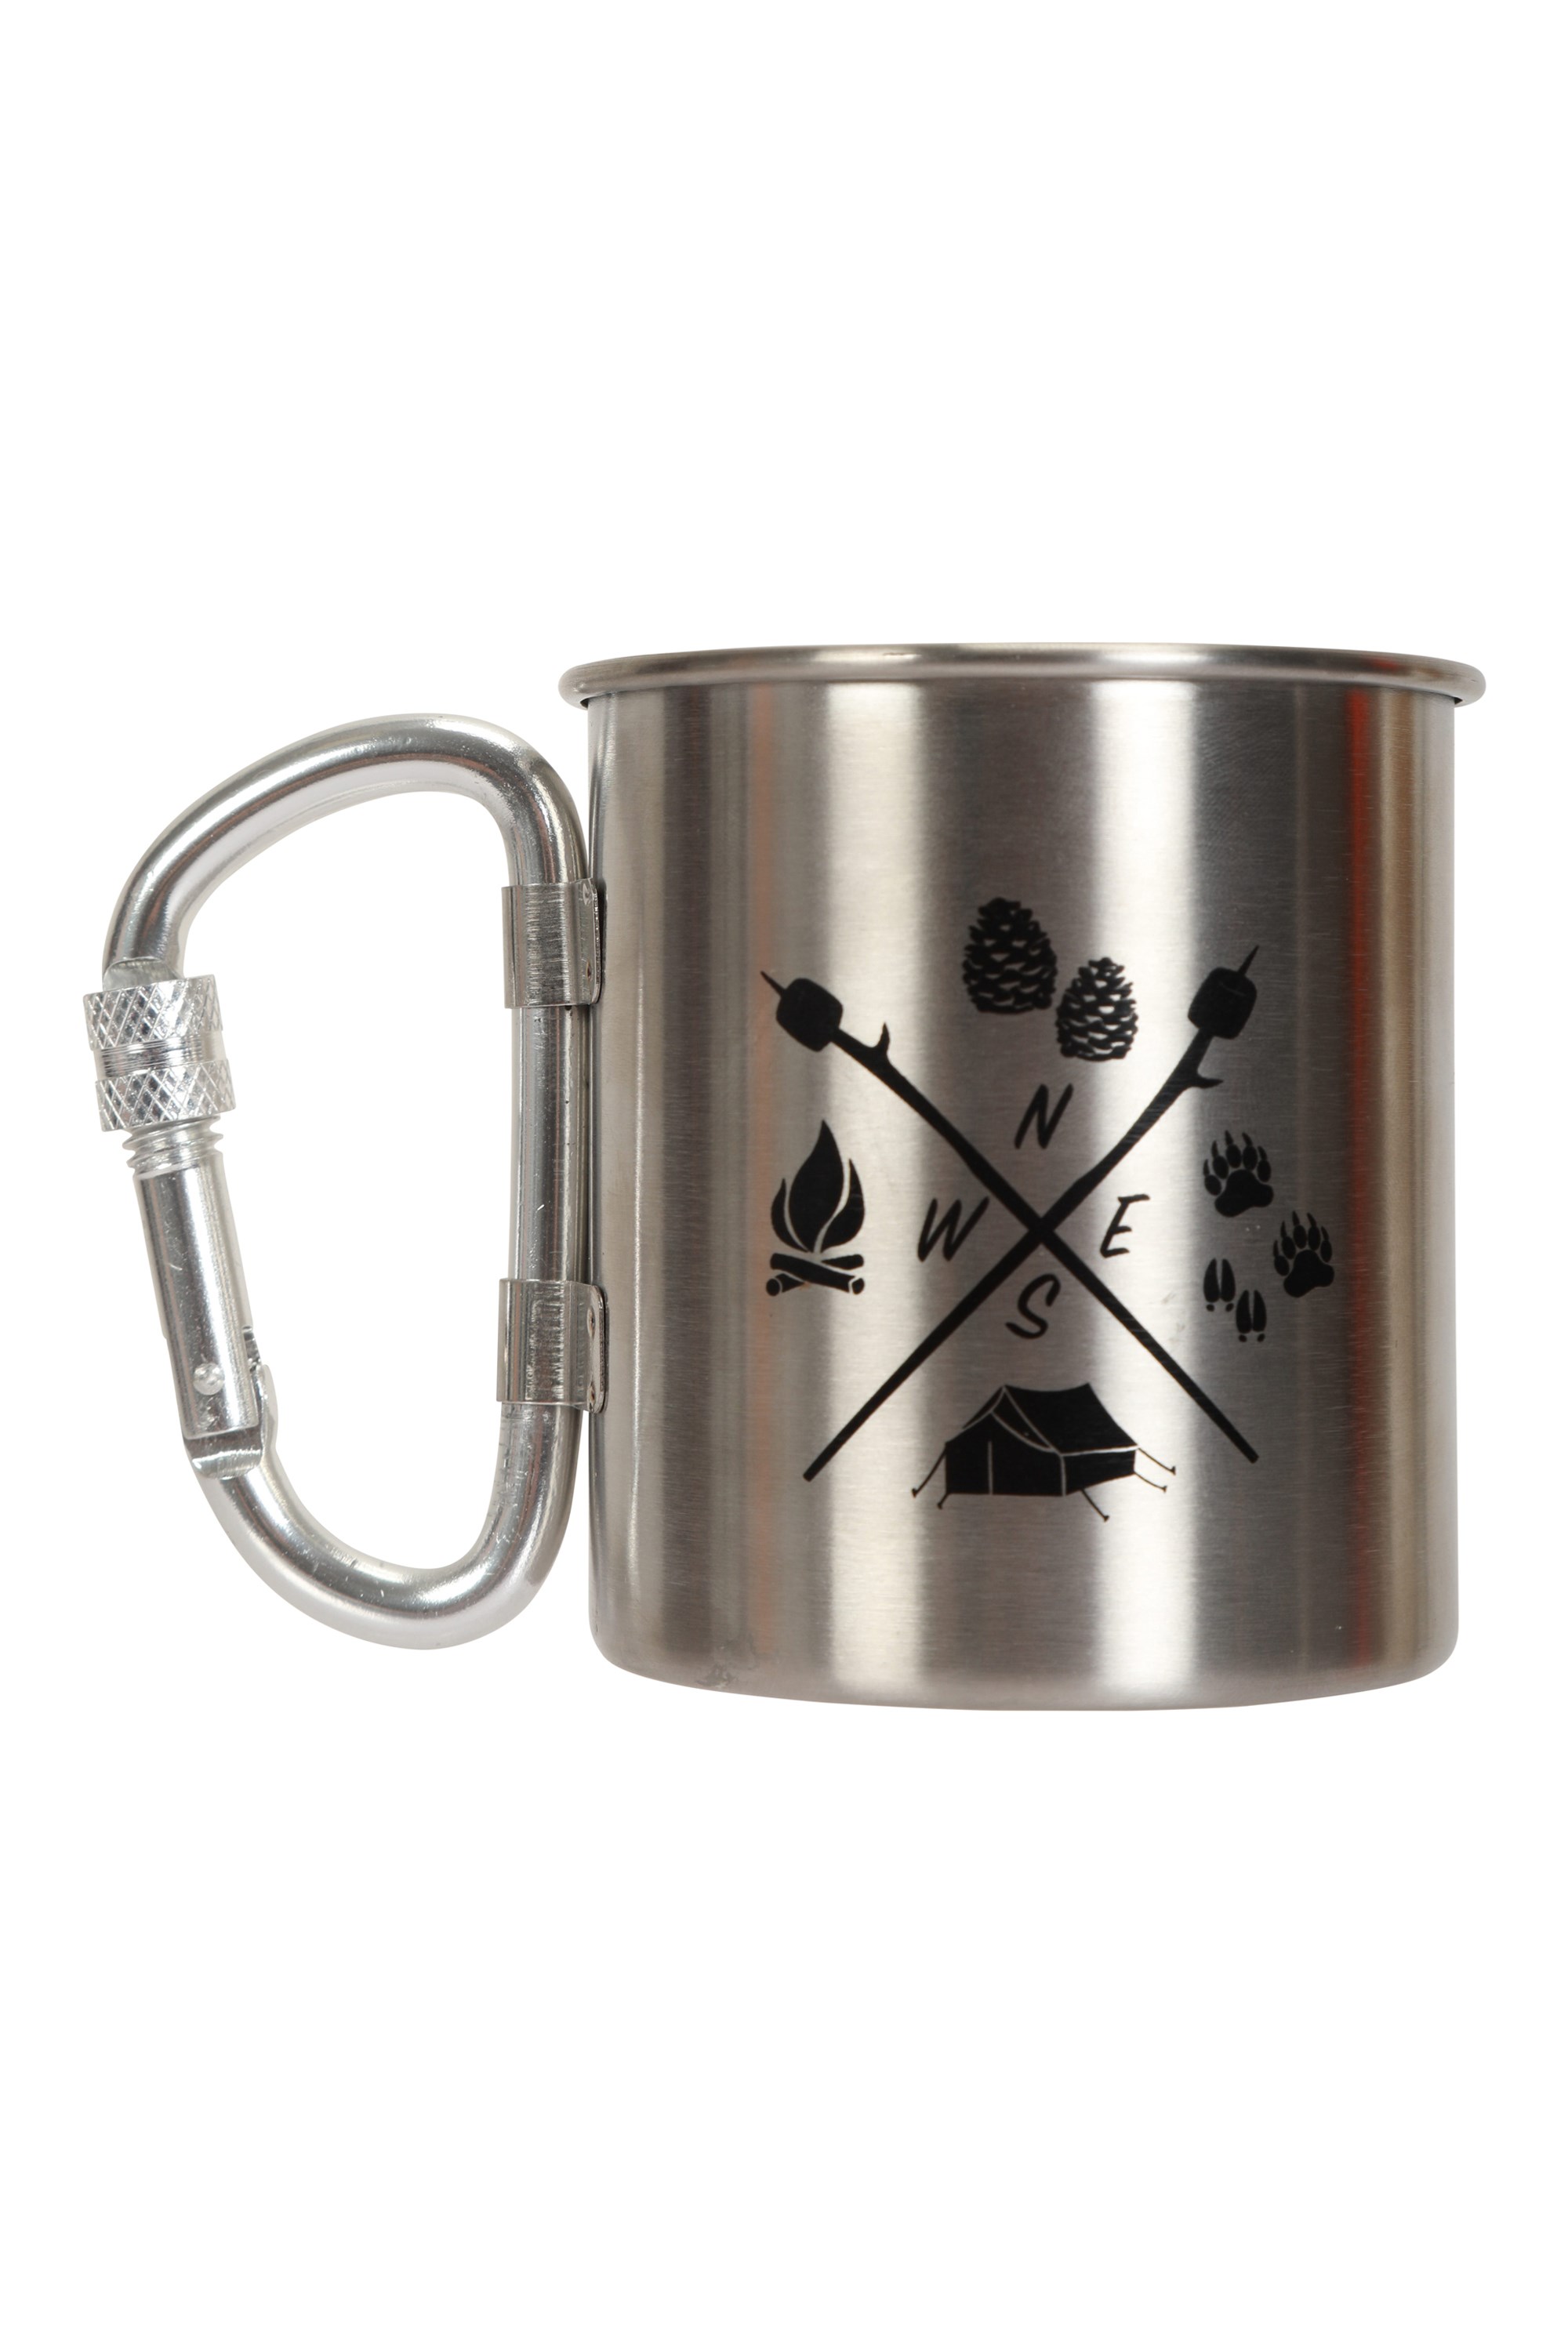 20+ Mountain Warehouse Camping Kettle